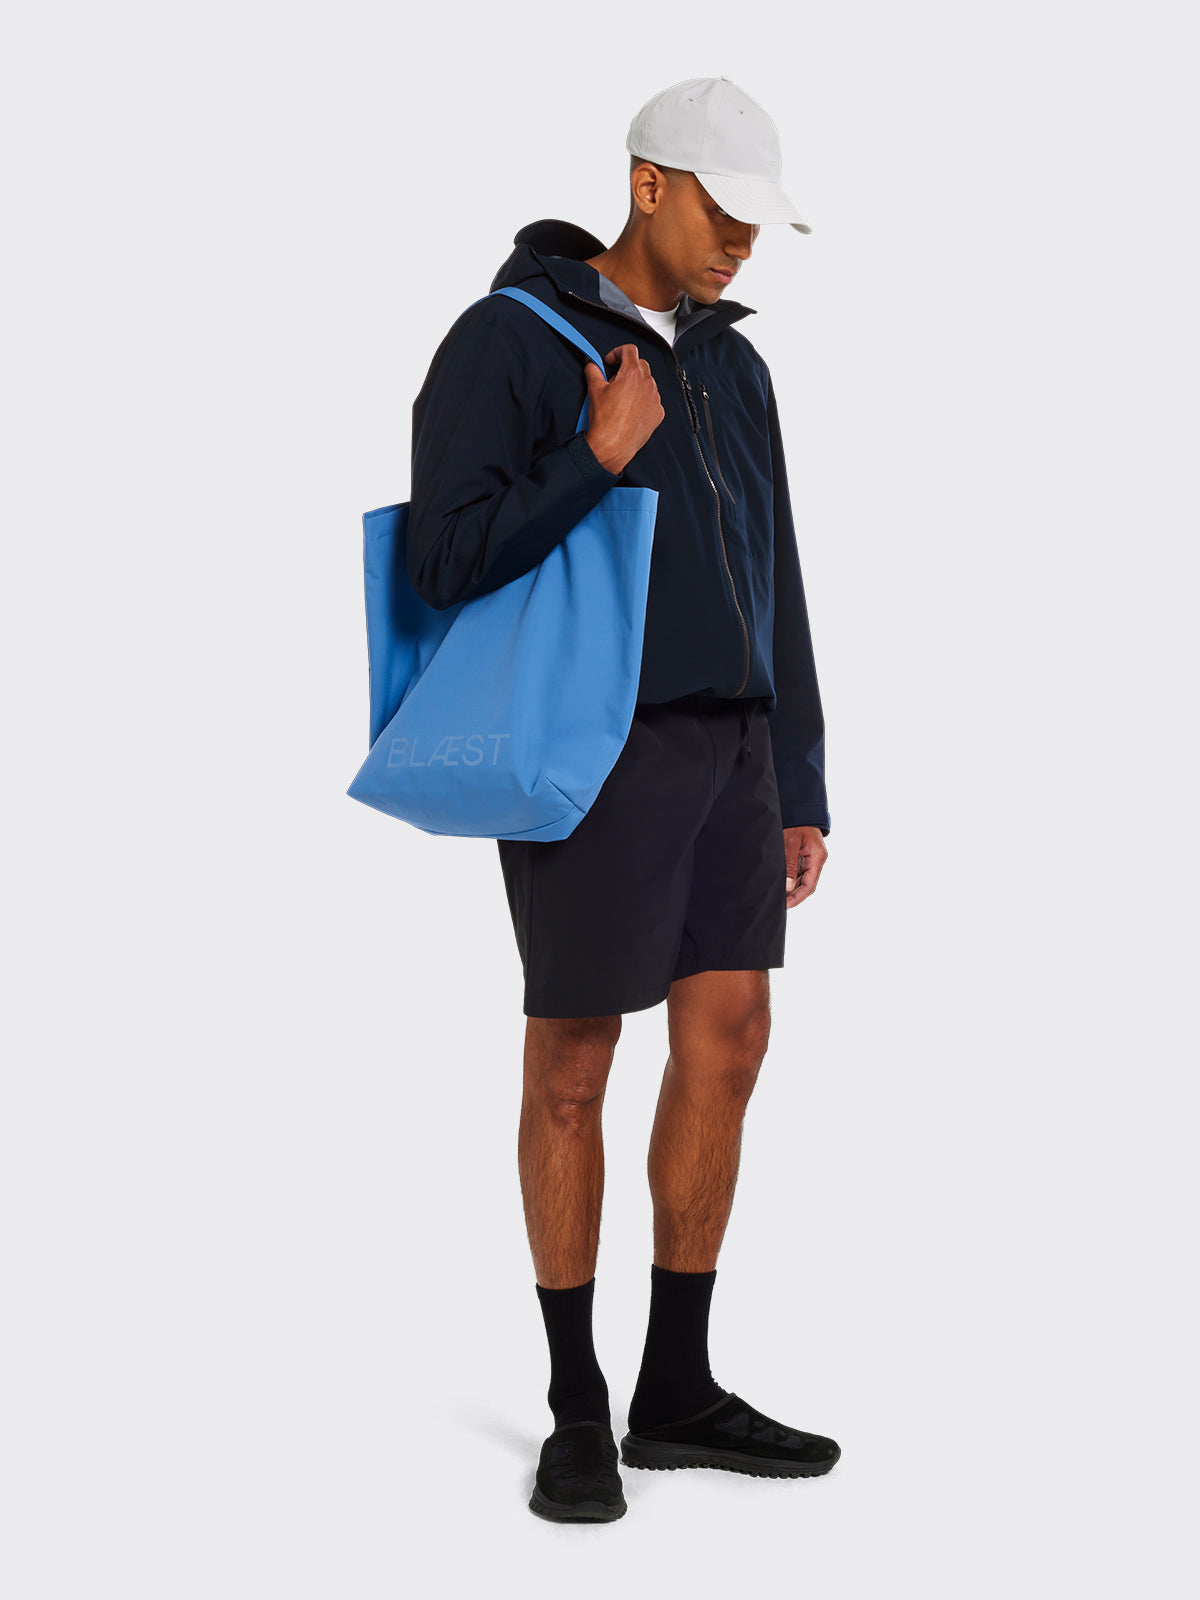 Man dressed in Stette jacket and Moa tote bag from Blæst